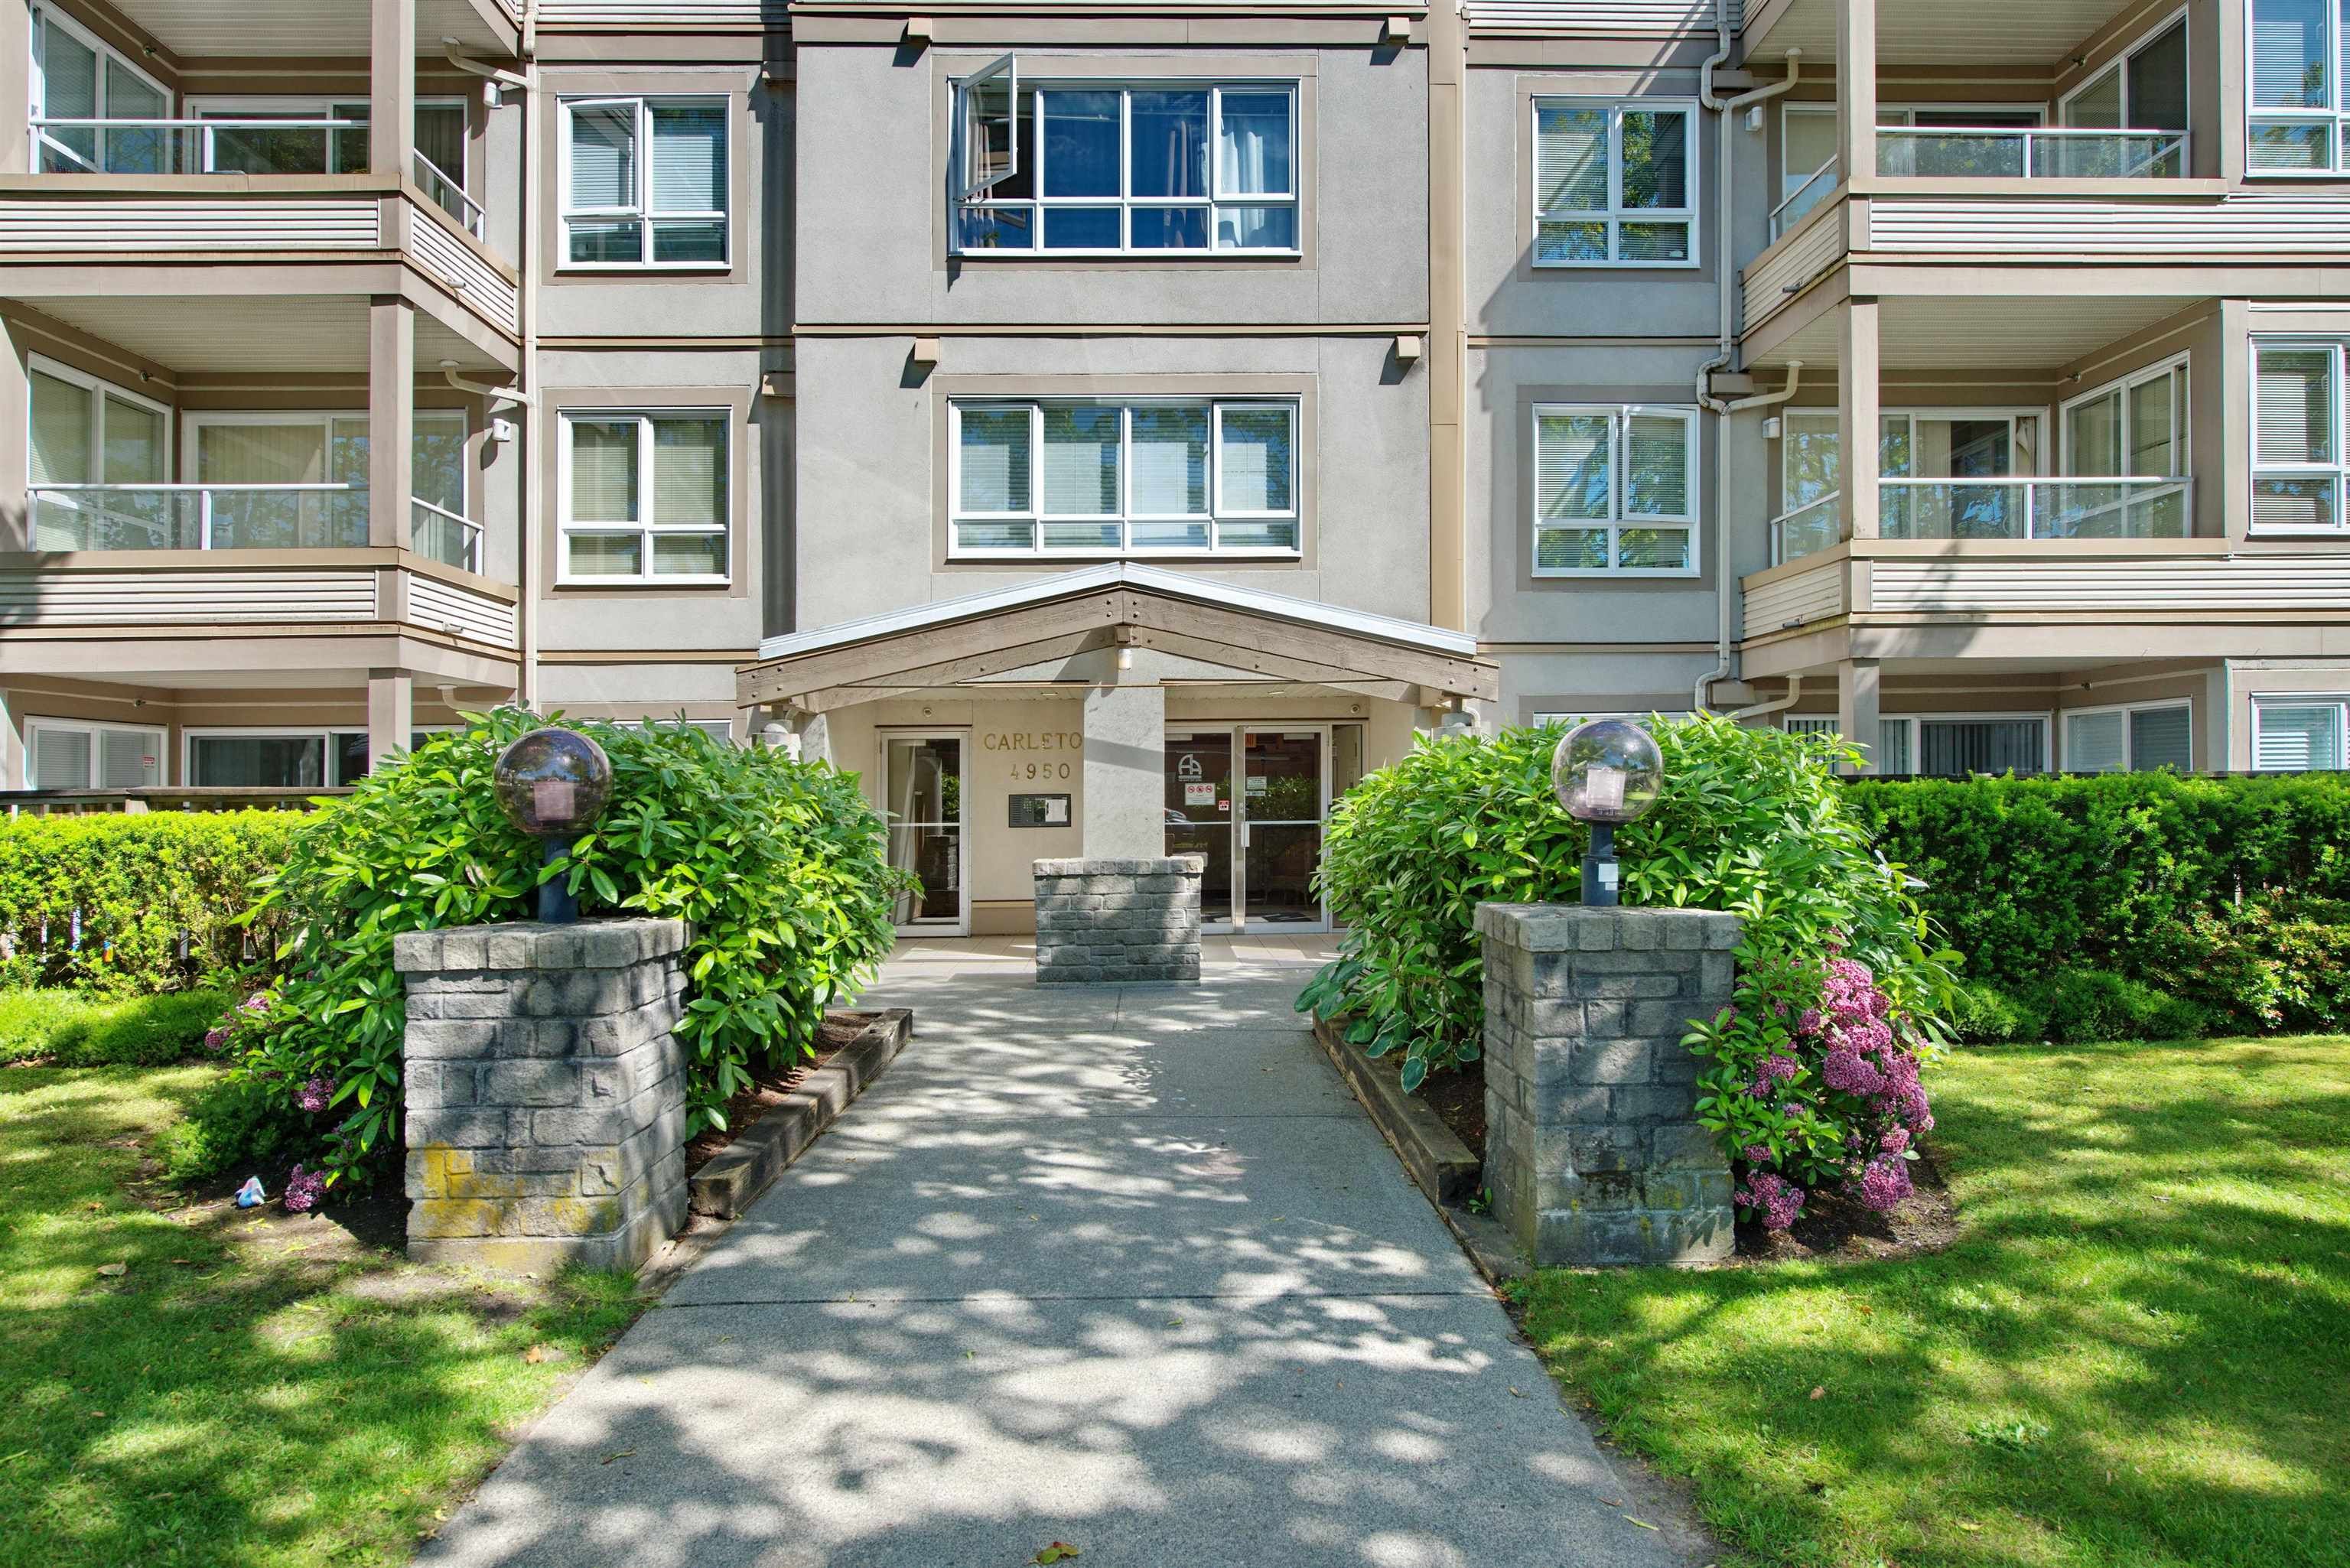 Main Photo: 205 4950 MCGEER Street in Vancouver: Collingwood VE Condo for sale (Vancouver East)  : MLS®# R2704047